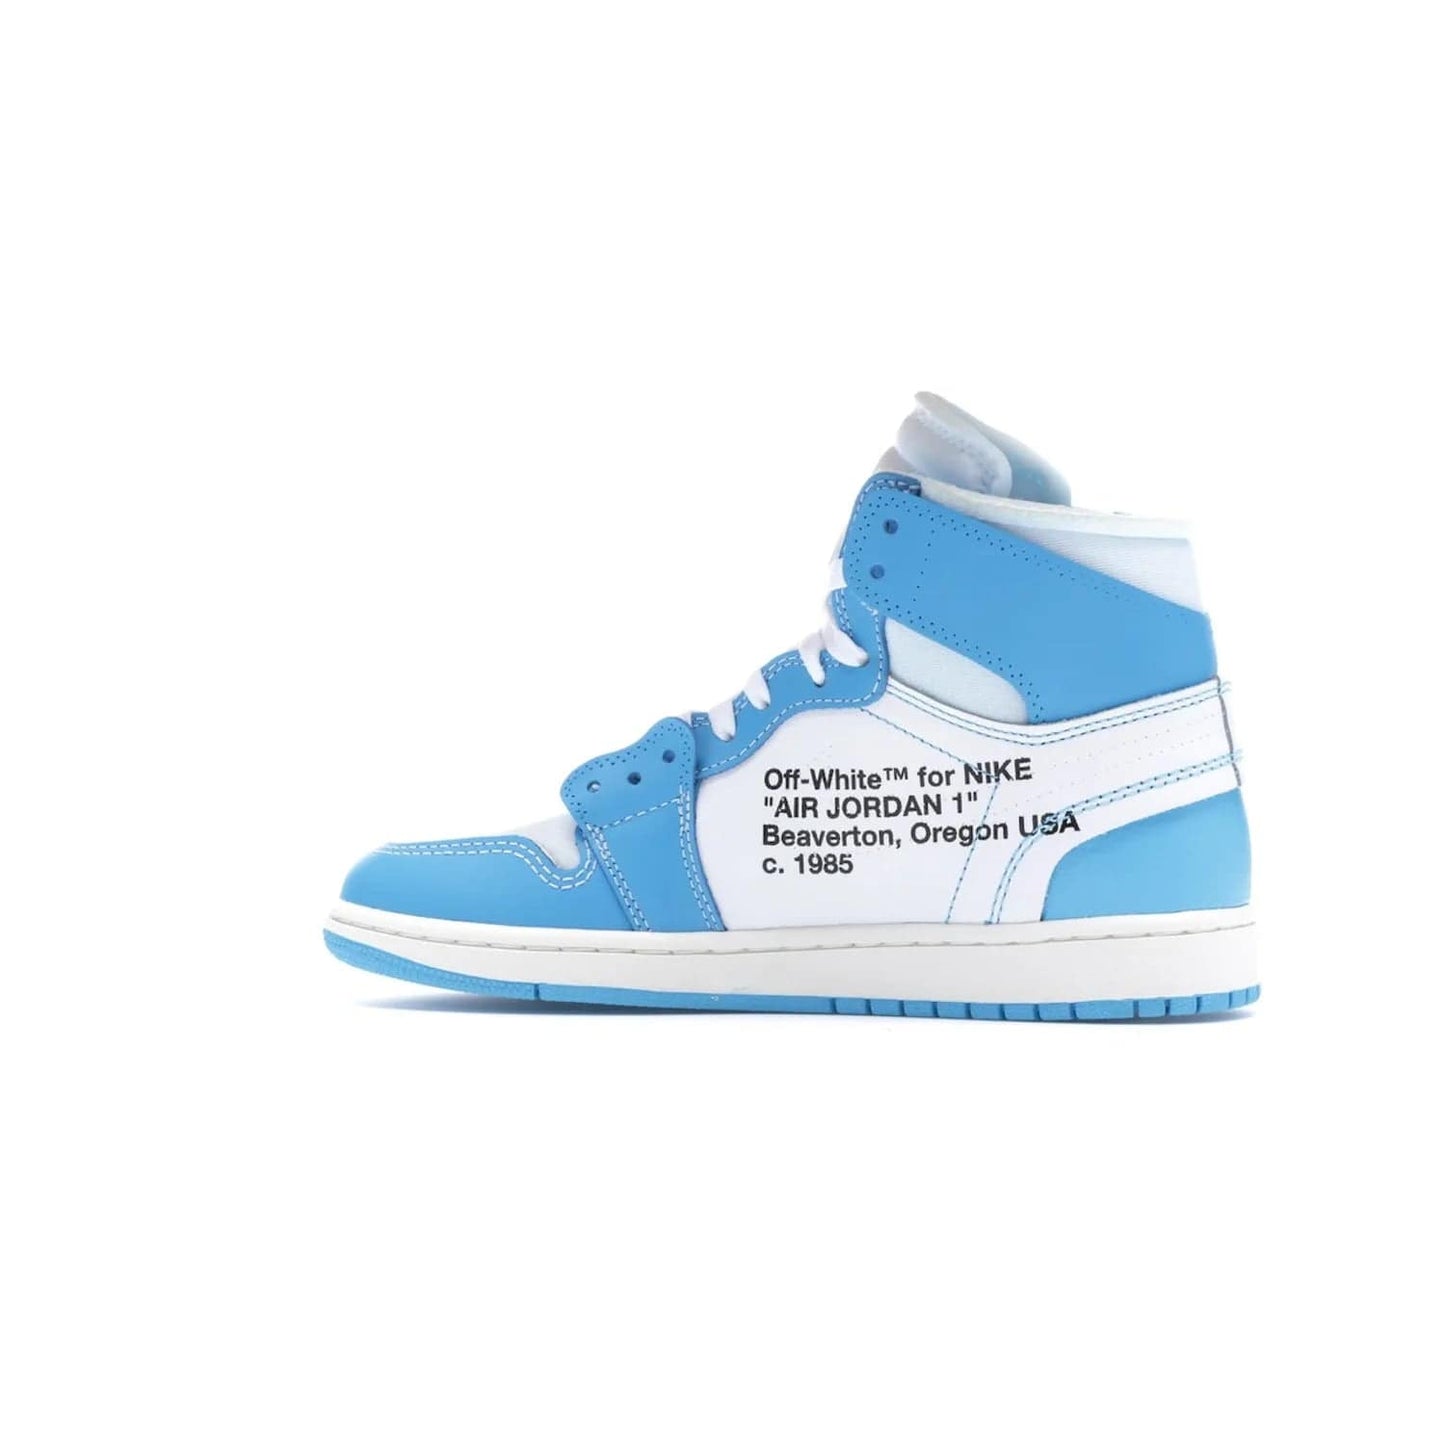 Jordan 1 Retro High Off-White University Blue - Image 21 - Only at www.BallersClubKickz.com - Classic Jordan 1 Retro High "Off-White UNC" sneakers meld style and comfort. Boasting deconstructed white and blue leather, Off-White detailing, and a white, dark powder blue and cone colorway, these sneakers are perfect for dressing up or down. Get the iconic Off-White Jordan 1's and upgrade your look.